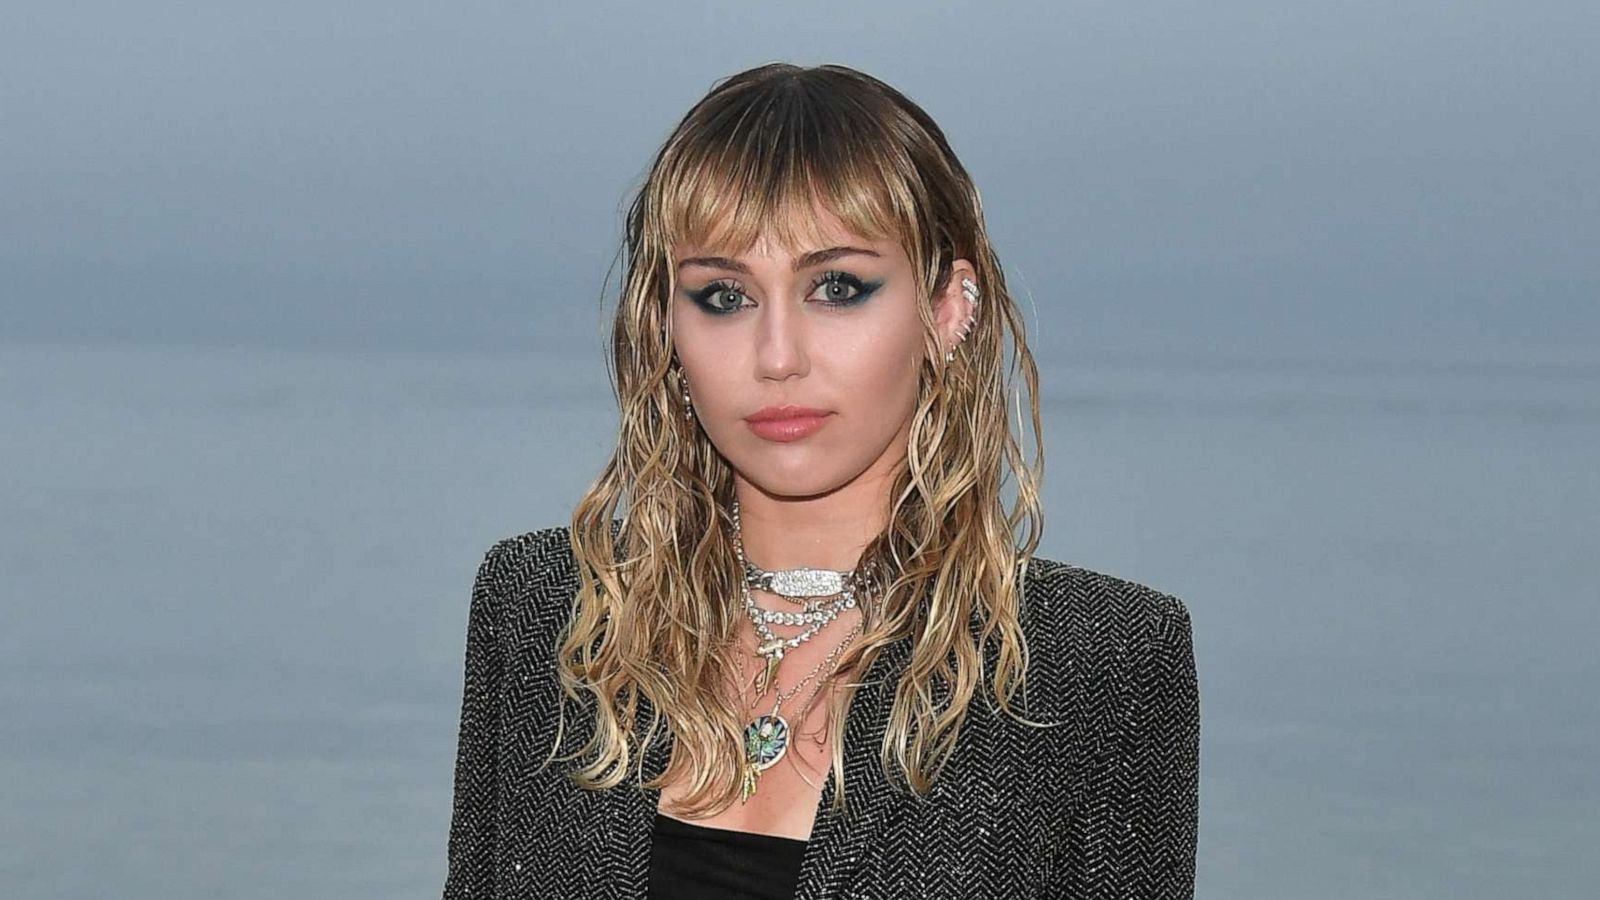 PHOTO: Miley Cyrus attends the Saint Laurent Mens Spring Summer 20 Show Photo Call on June 06, 2019, in Malibu, Calif.